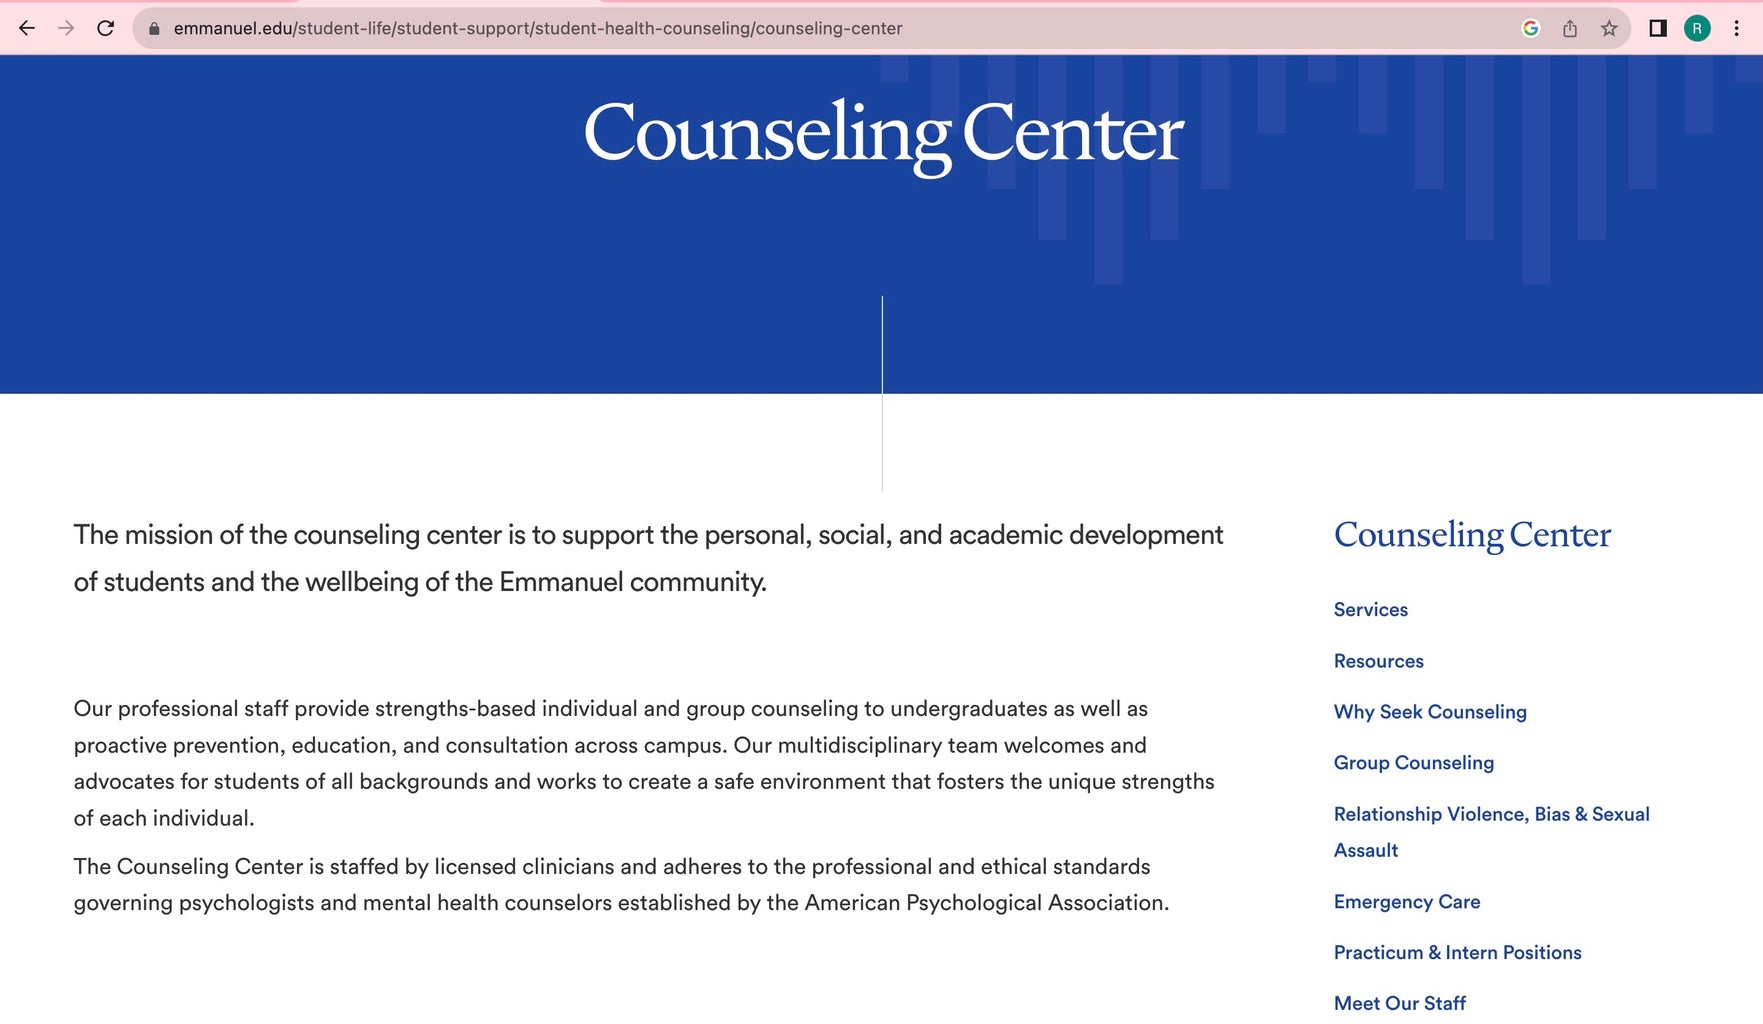 counseling center resources